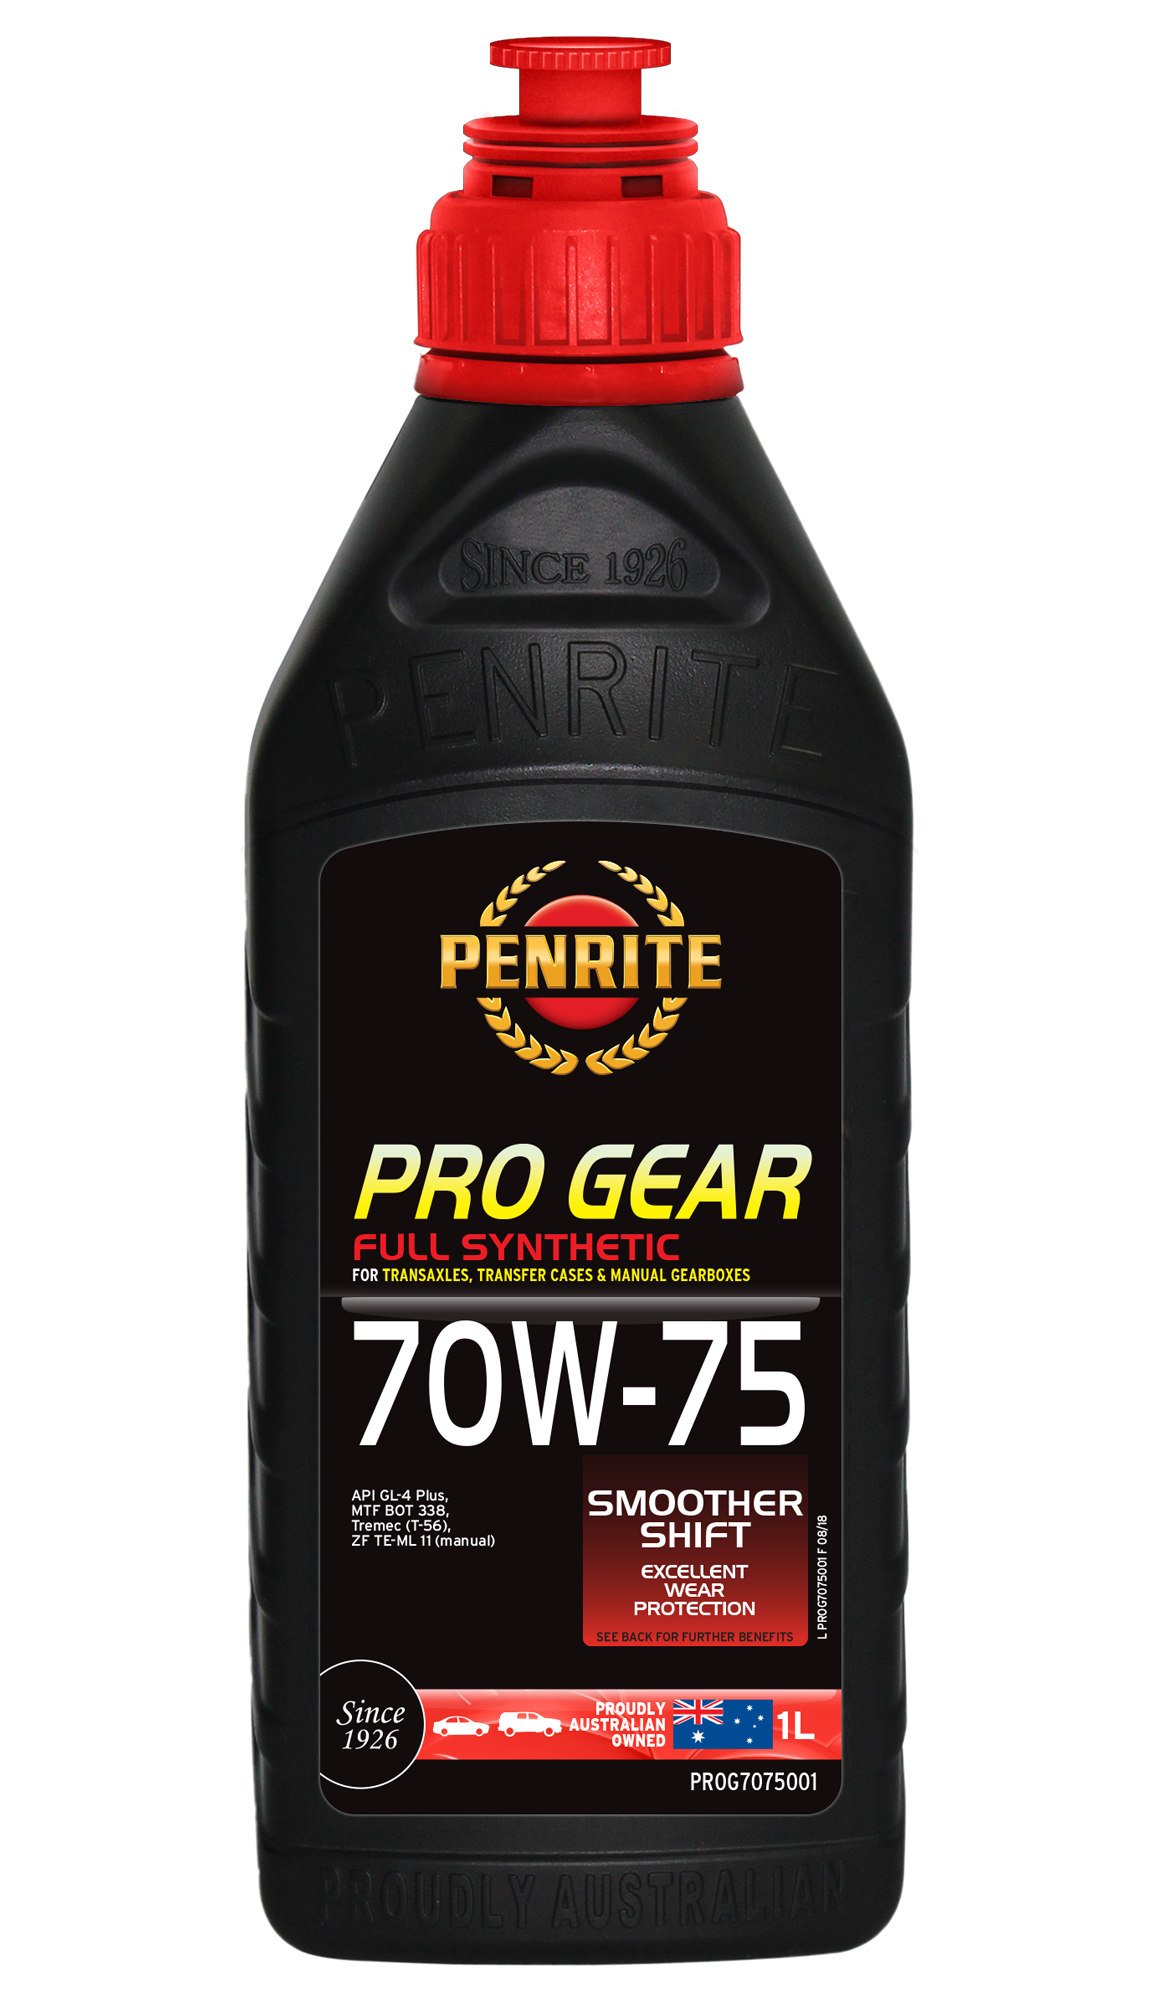 PRO GEAR 70W-75 (Full Syn.) - Penrite | Universal Auto Spares